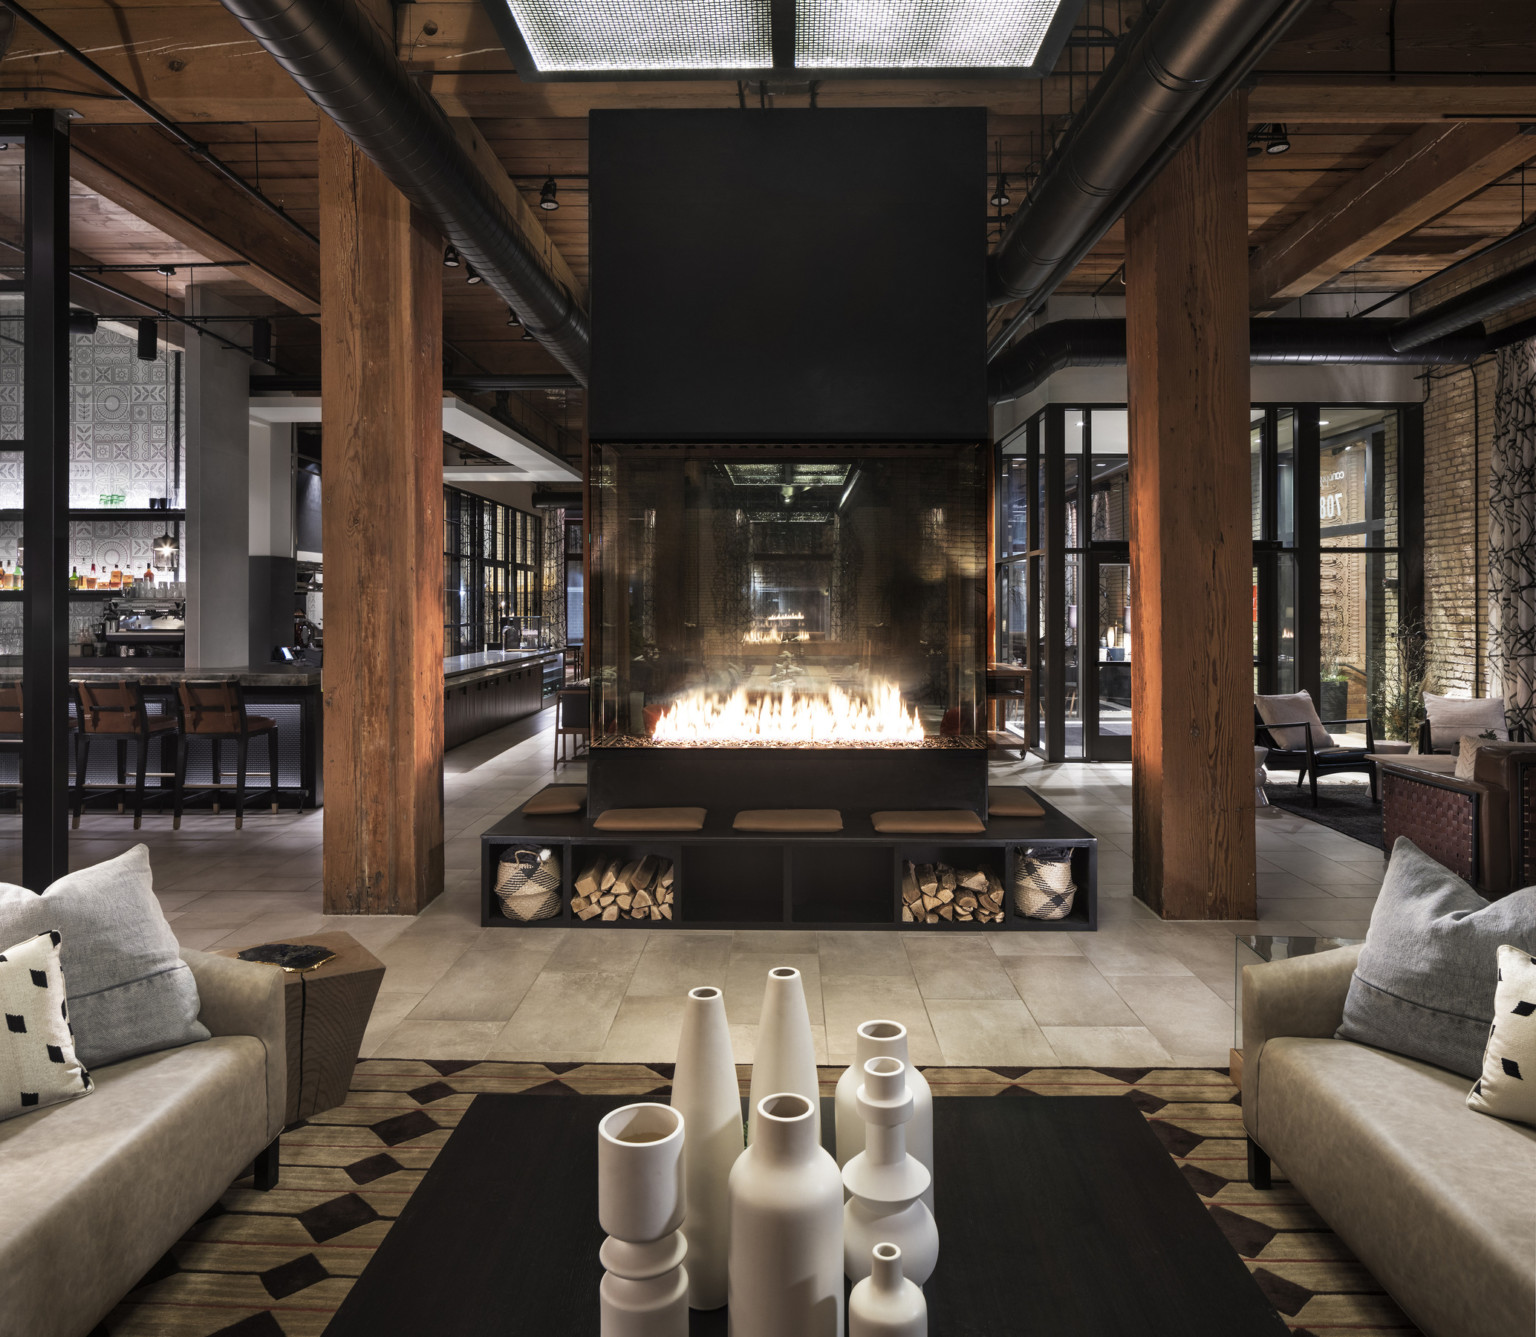 Fireplace elevated on black bench with under seat storage between wood pillars in bar with floor to ceiling windows